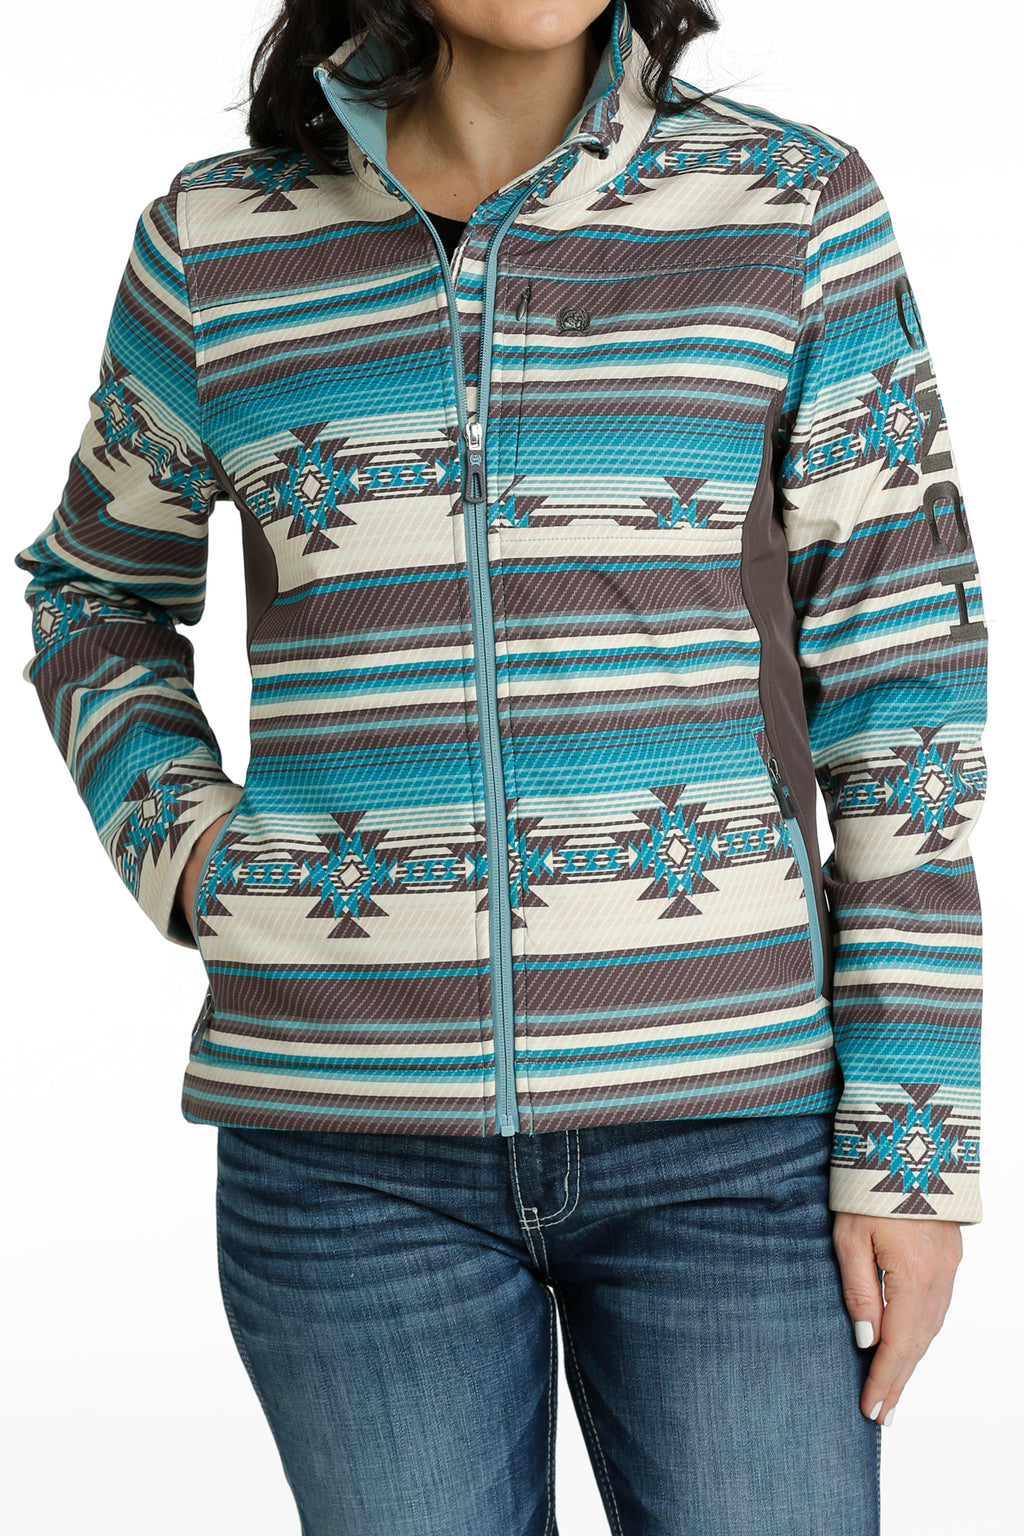 CINCH Women's Concealed Cary Bonded Jacket